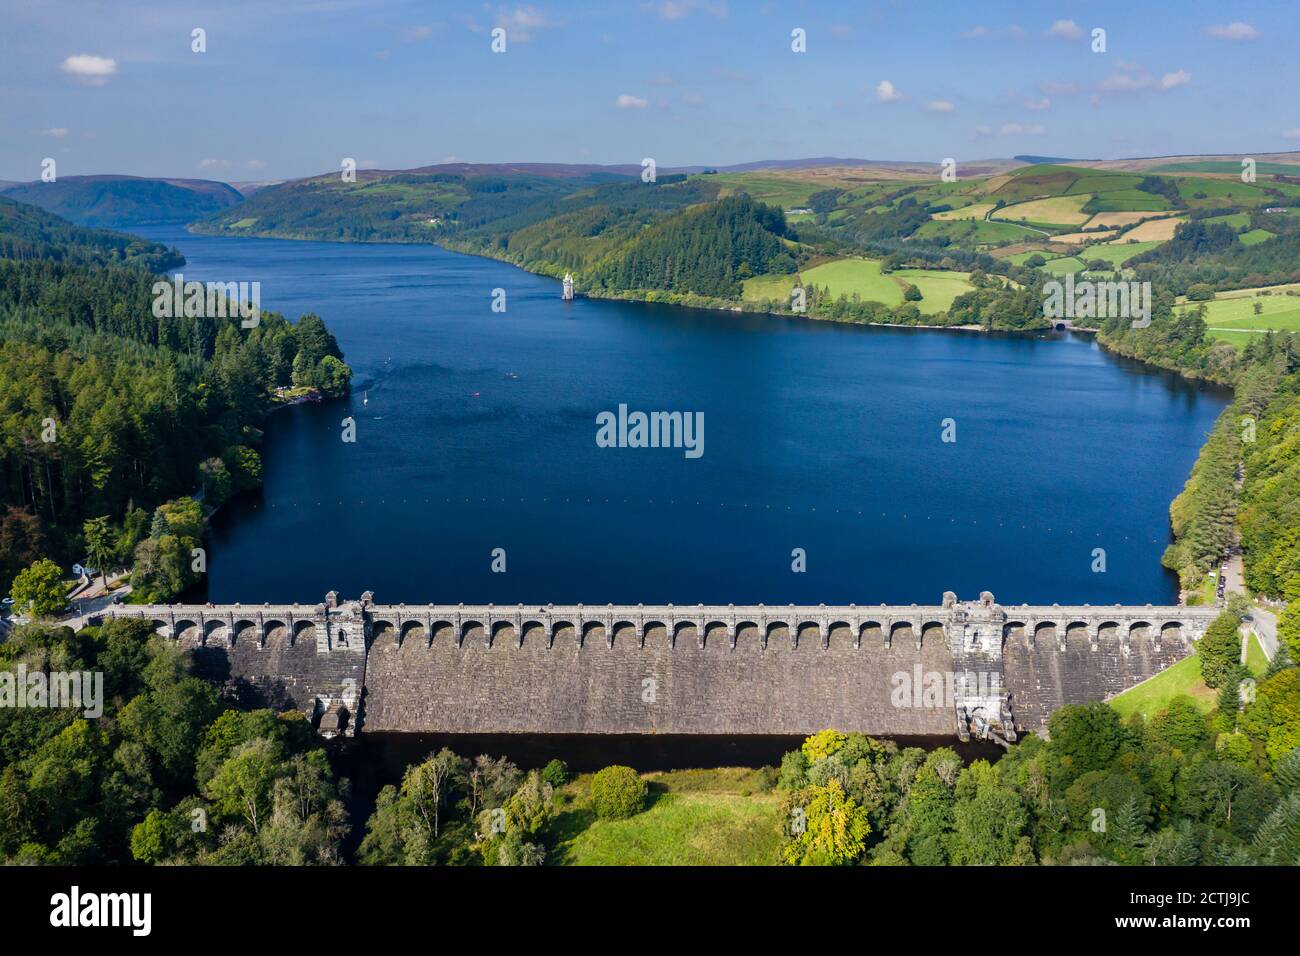 Aerial view of a huge lake surrounded by rural farmland and forest. (Lake Vyrnwy, Wales) Stock Photo